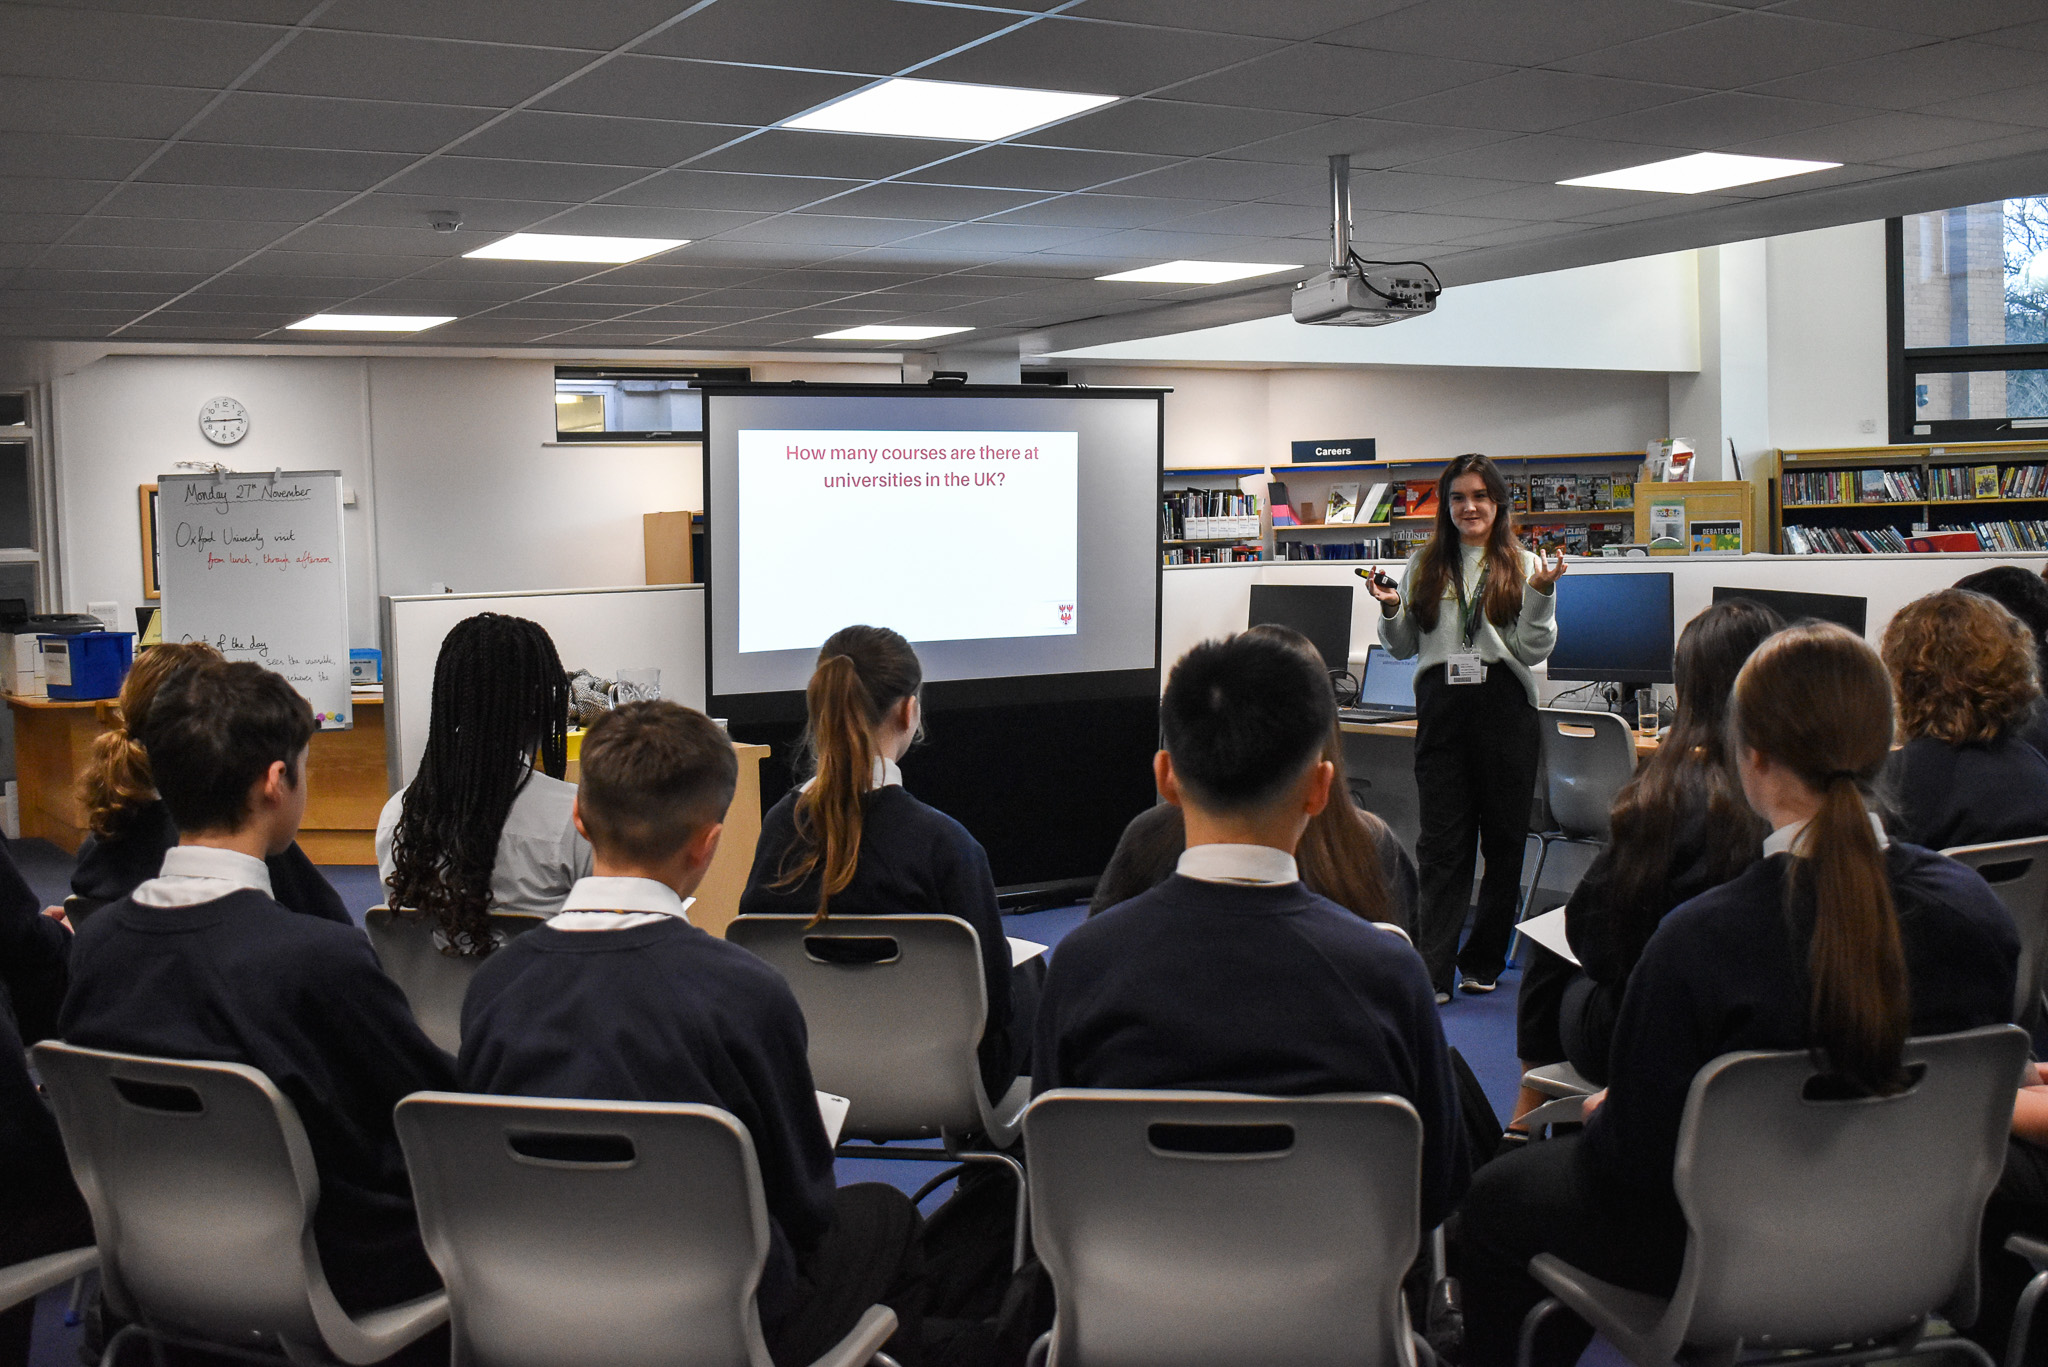 Molly speaking to pupils at Dowdales School. Image shows seating students from behind looking towards Molly standing at the front of the classroom next to a screen showing a powerpoint presentation asking how many university courses there are.